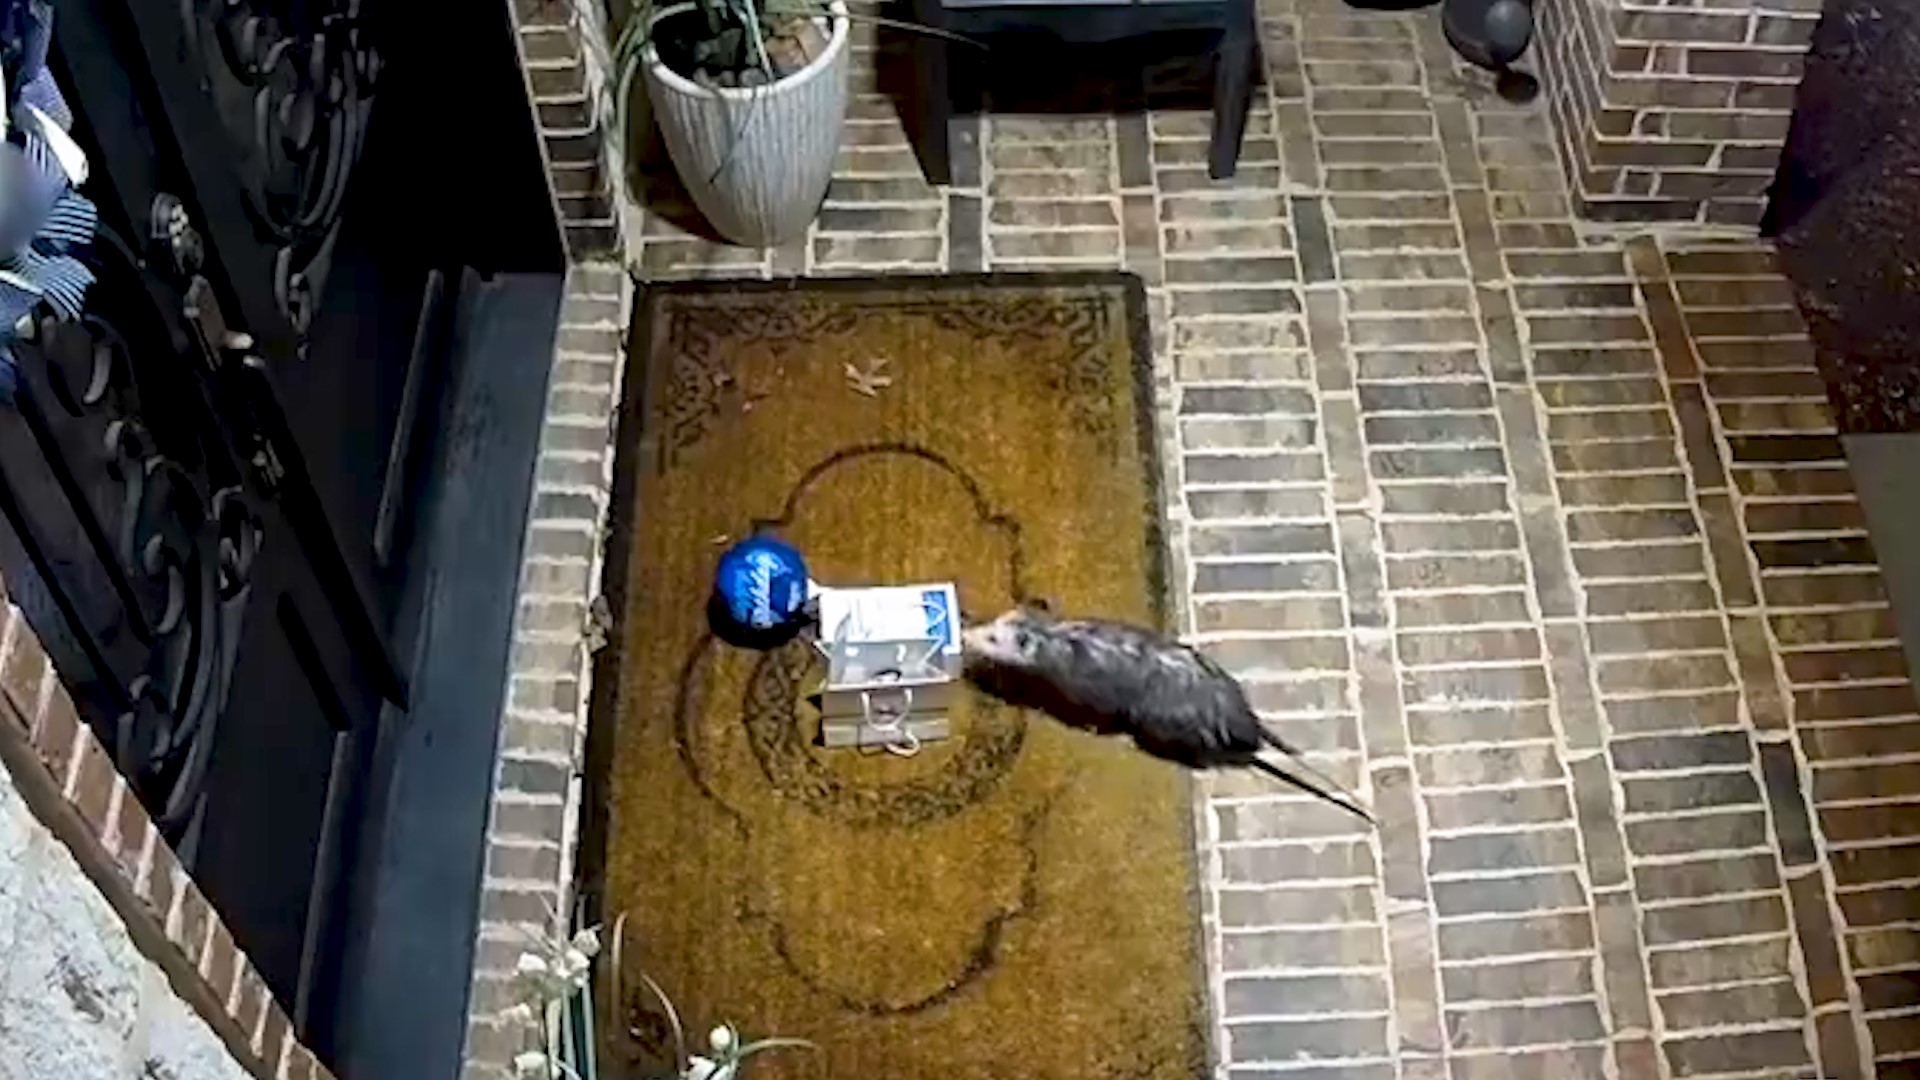 The Southlake Department of Public Safety released surveillance video from Jan. 27, 2024, showing a possum stealing a Tiff's Treats package off a porch in Texas.